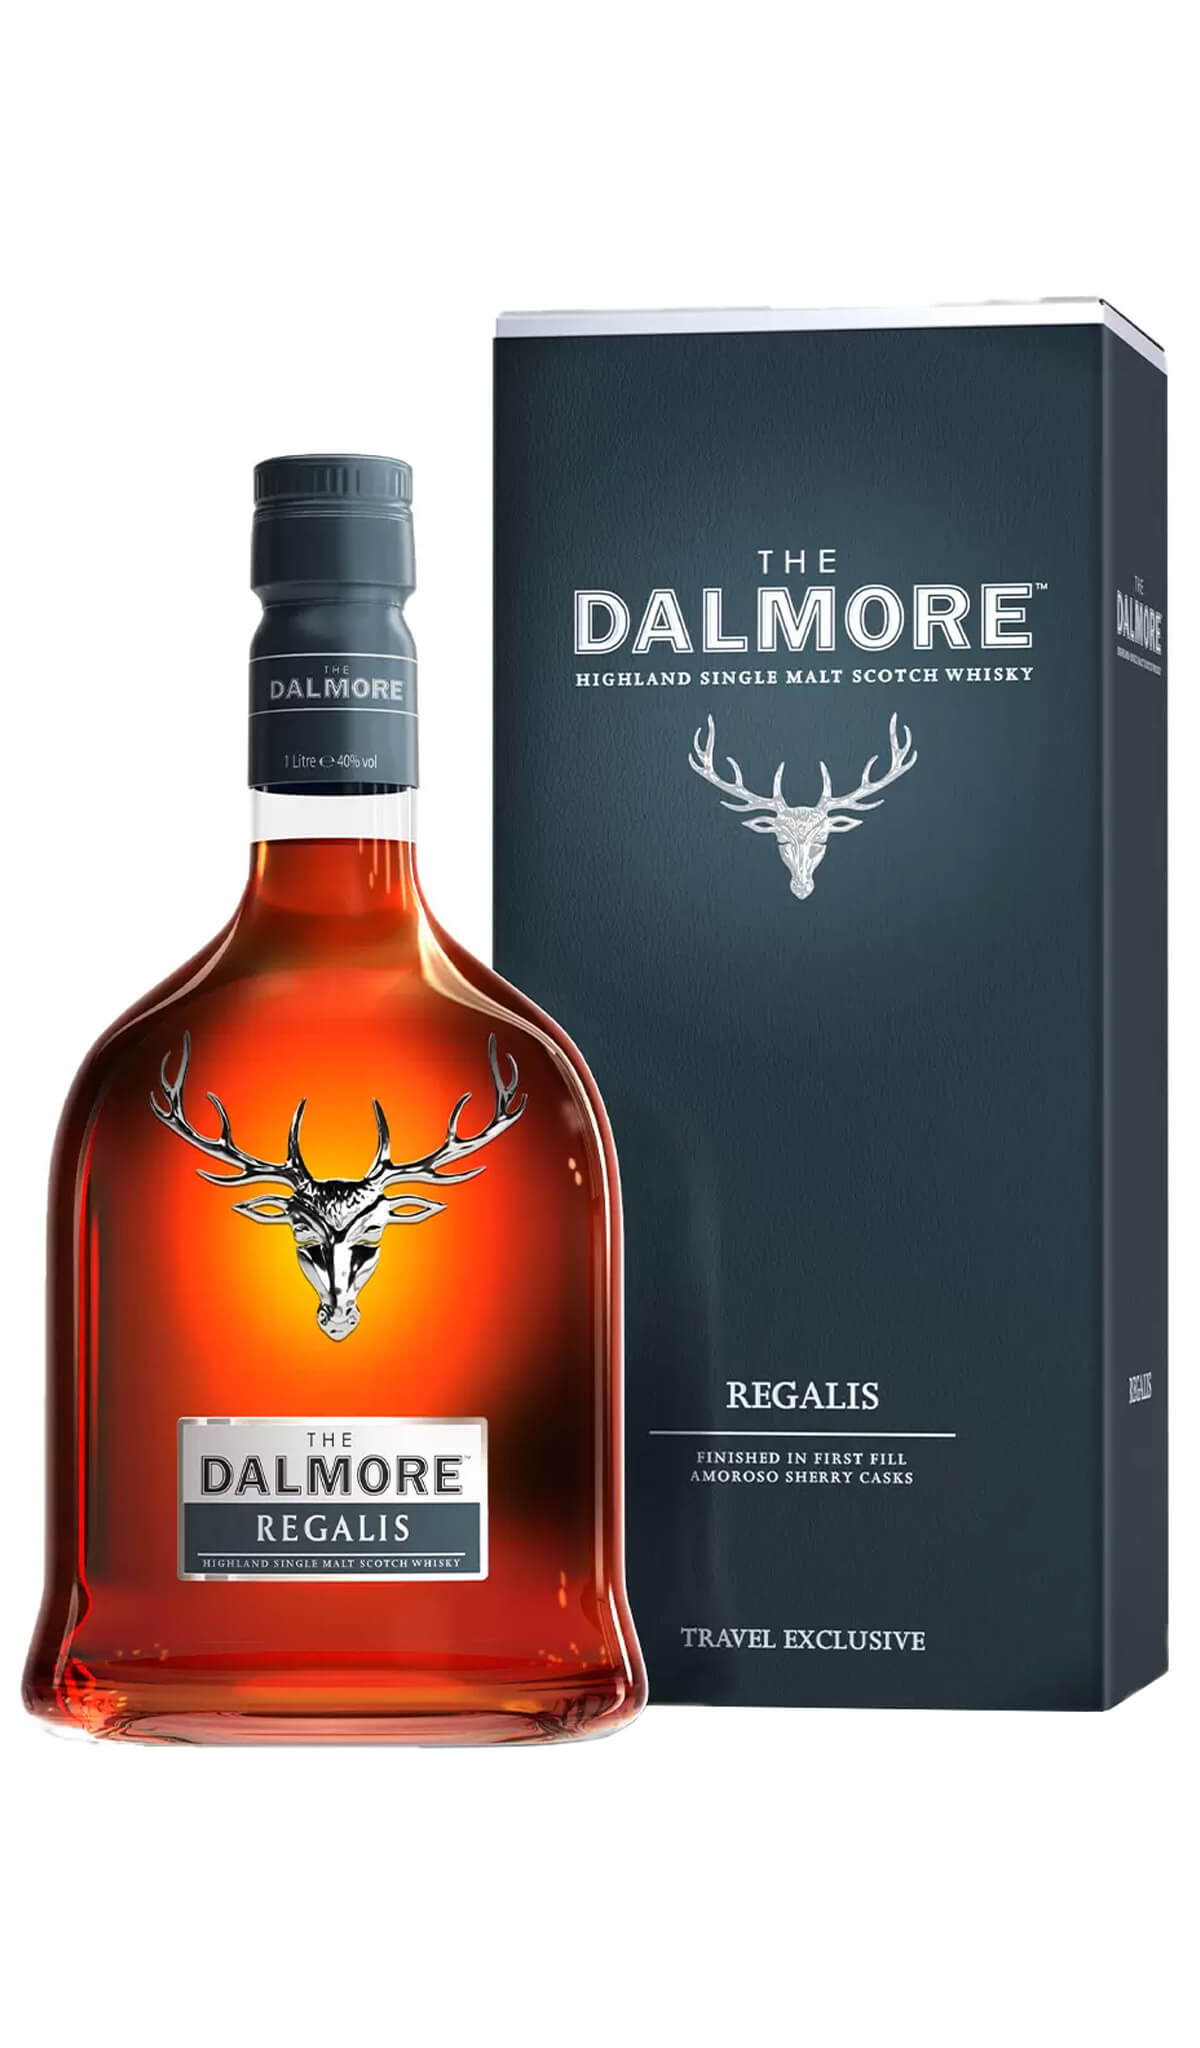 Find out more, explore the range and buy The Dalmore Regalis Highland Single Malt 1 Litre available online at Wine Sellers Direct - Australia's independent liquor specialists.